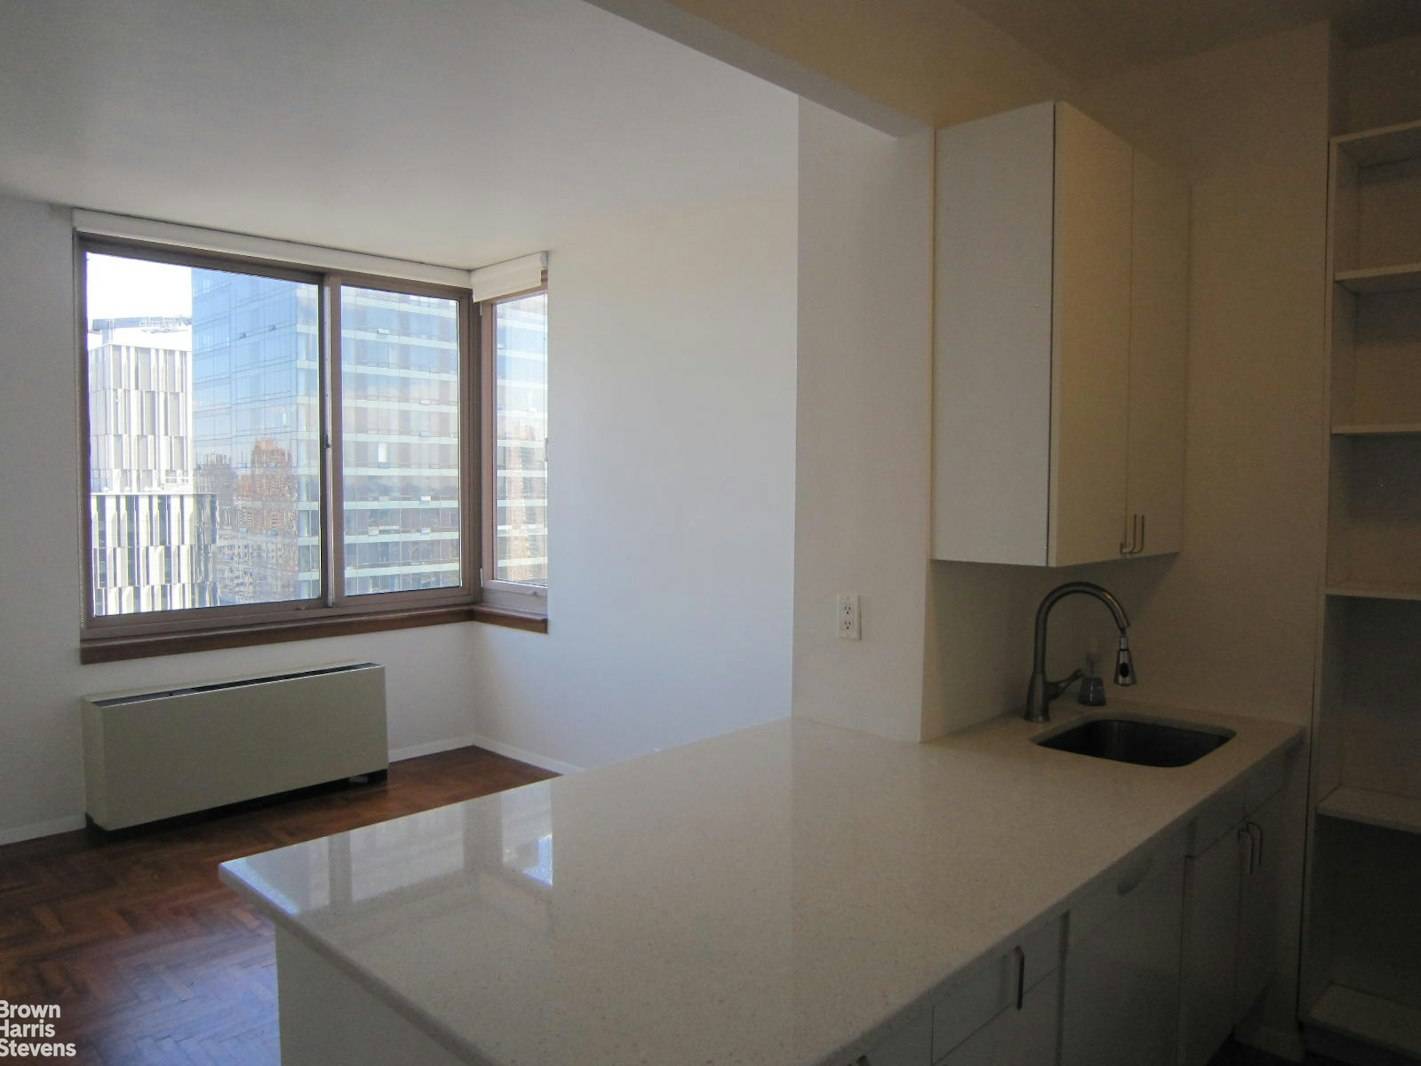 No Fee ! Live large in this cozy, sun filled 1 bedroom on the 42nd floor of the Belaire condominium with spectacular panoramic city and river views !